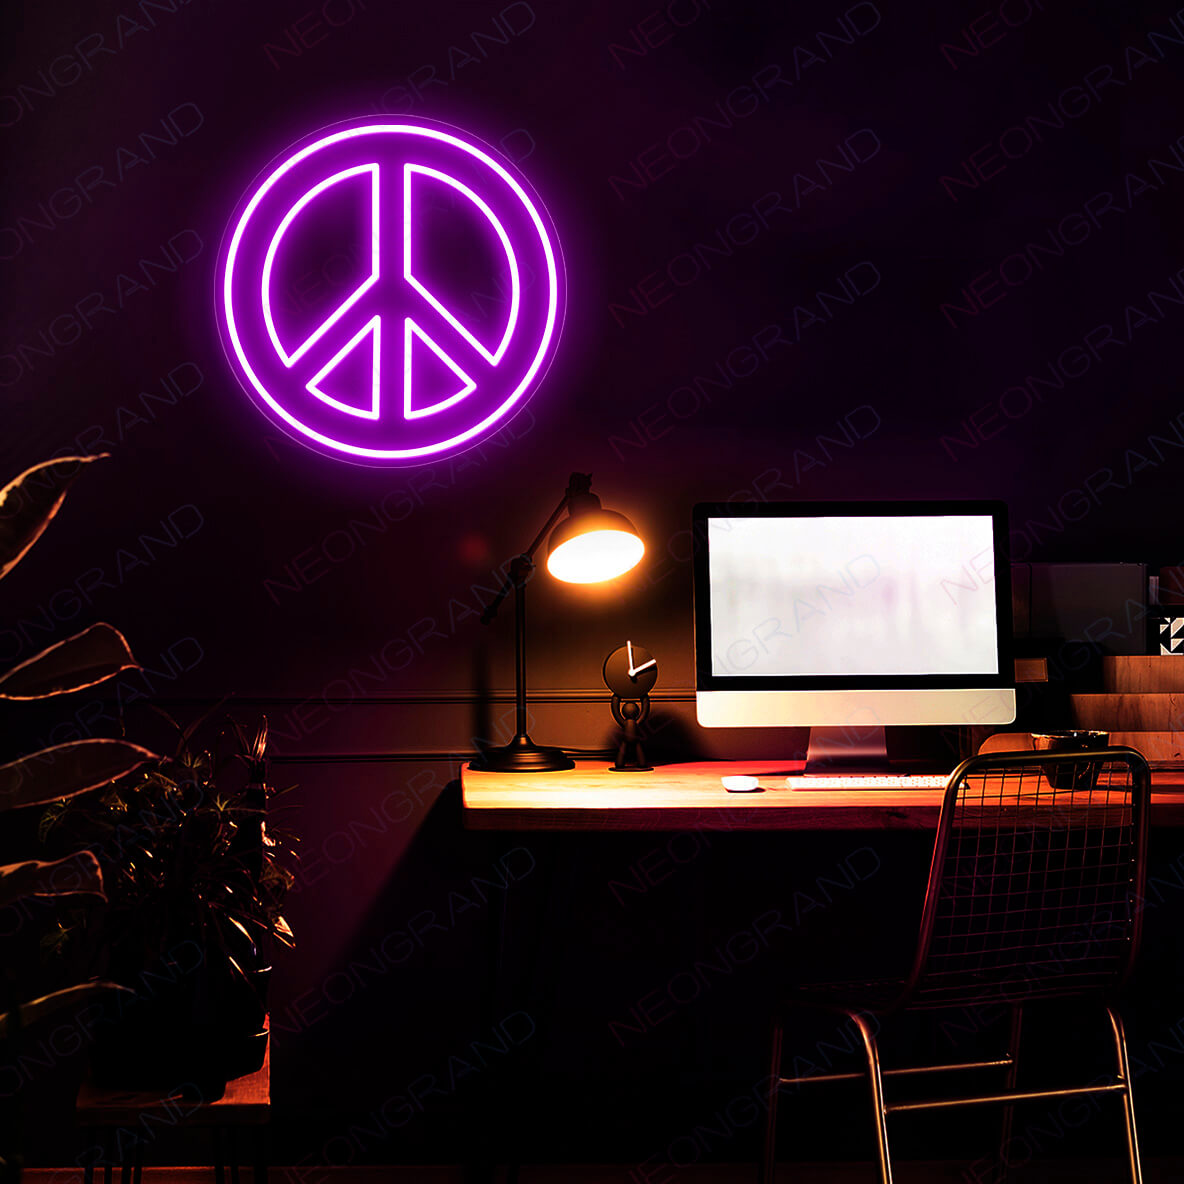 Neon Peace Sign Led Light, Lighted Up Peace Neon Signs purple